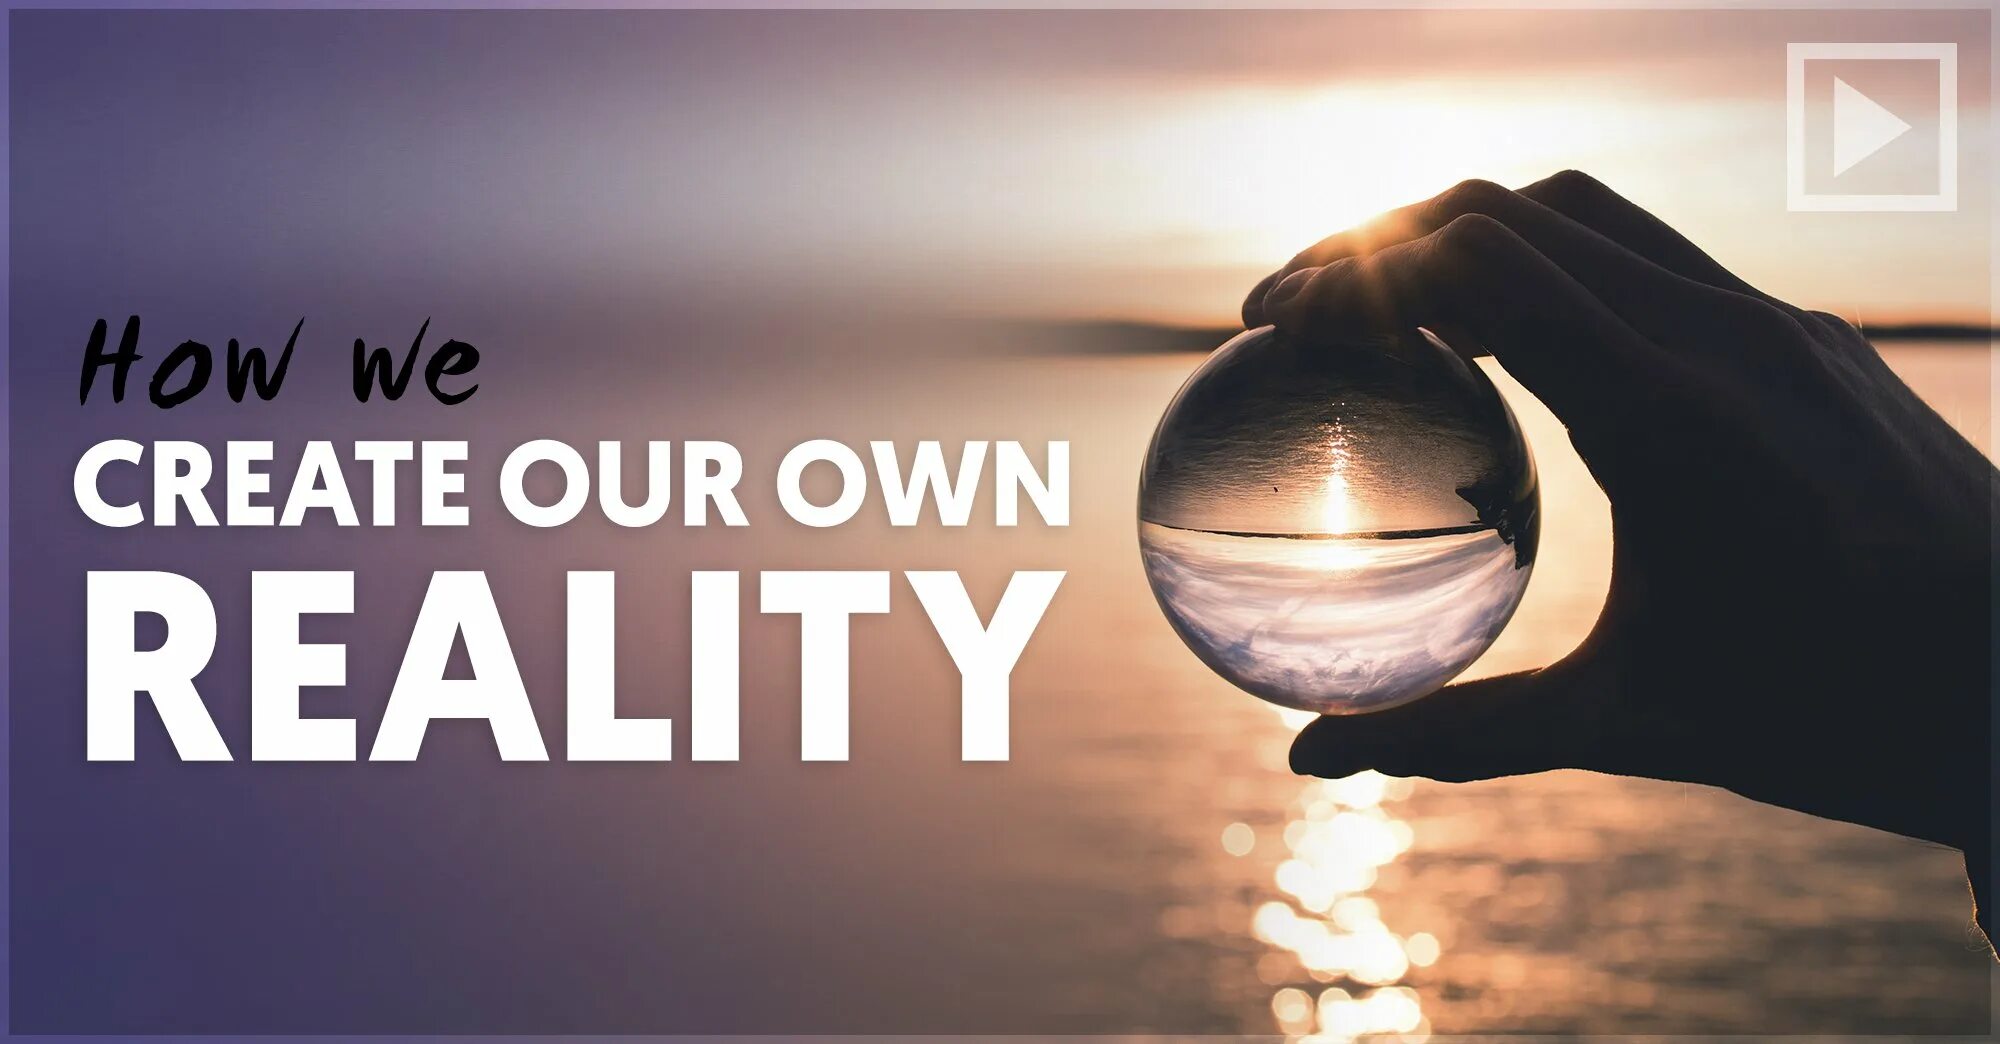 Create your own reality. Our Creation. Our Faith creates our reality. Create your New reality. Real our life